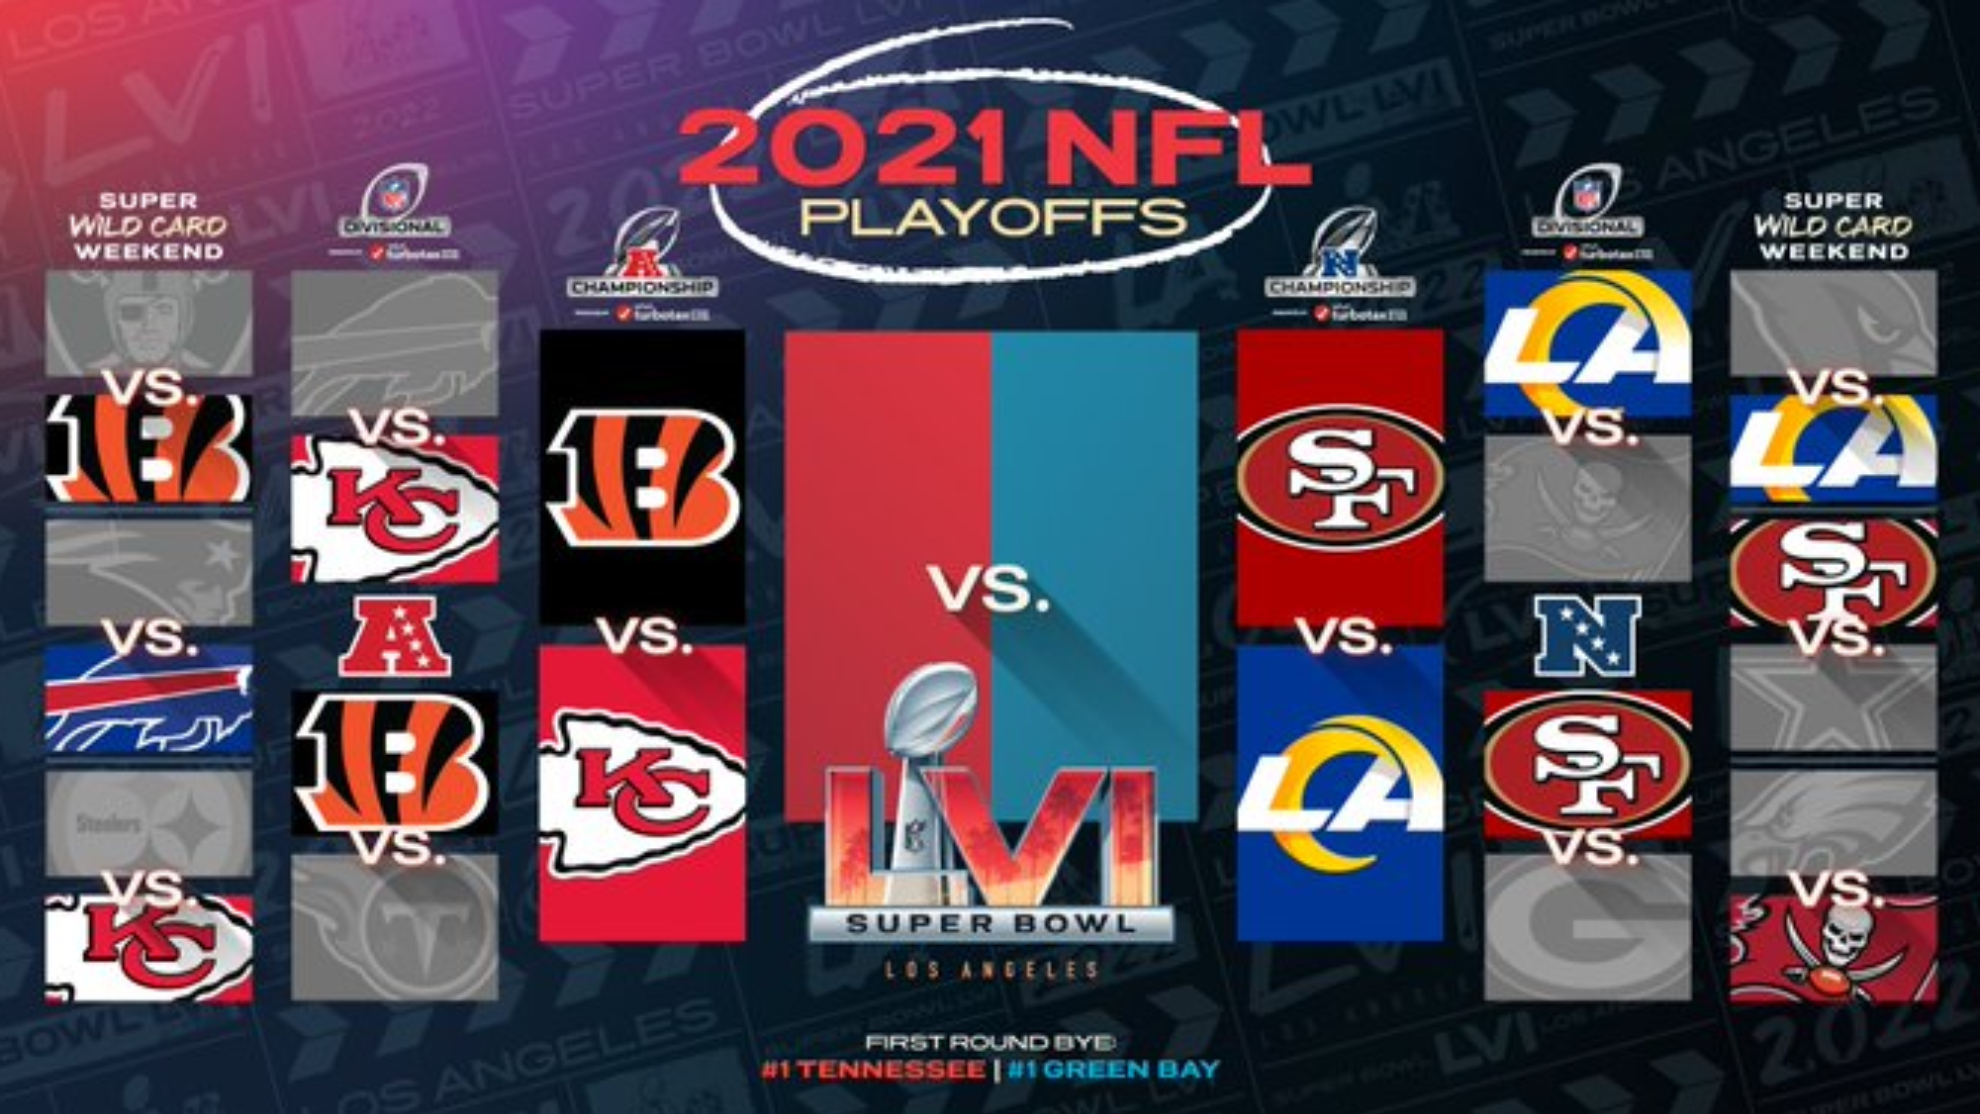 nfl playoff games today 2022